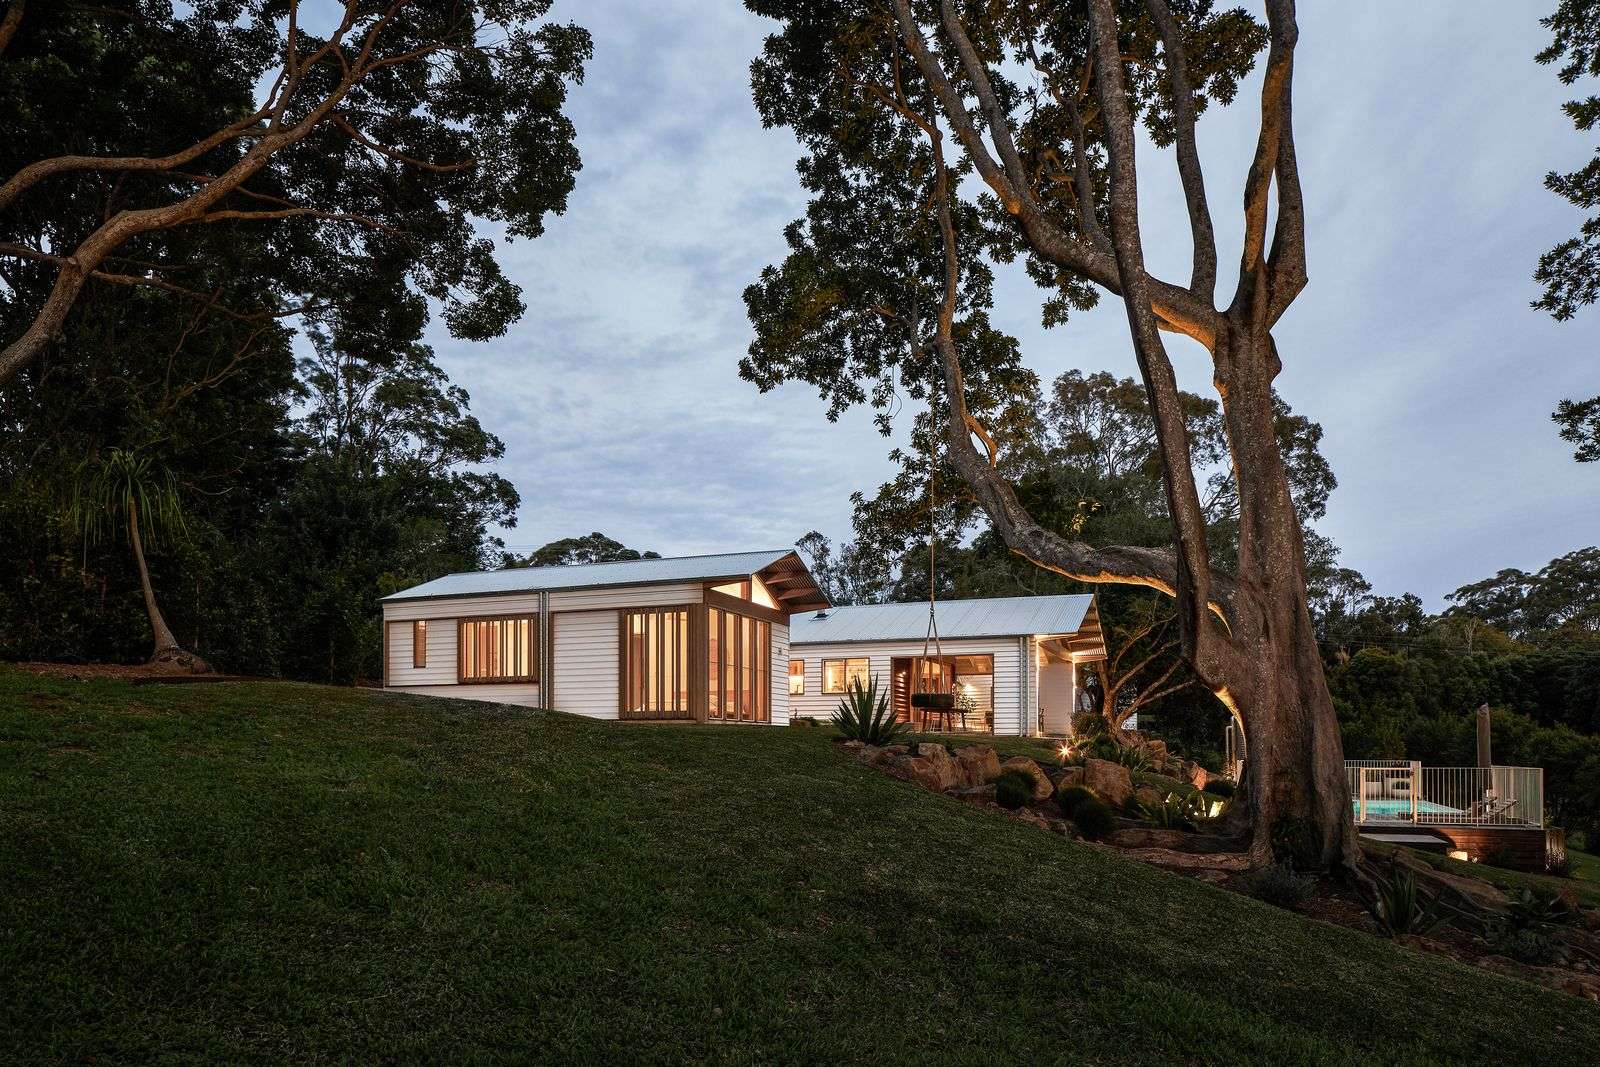 The Caretaker's by Aphora Architecture showing the house sitting in the Byron Hinterland landscape